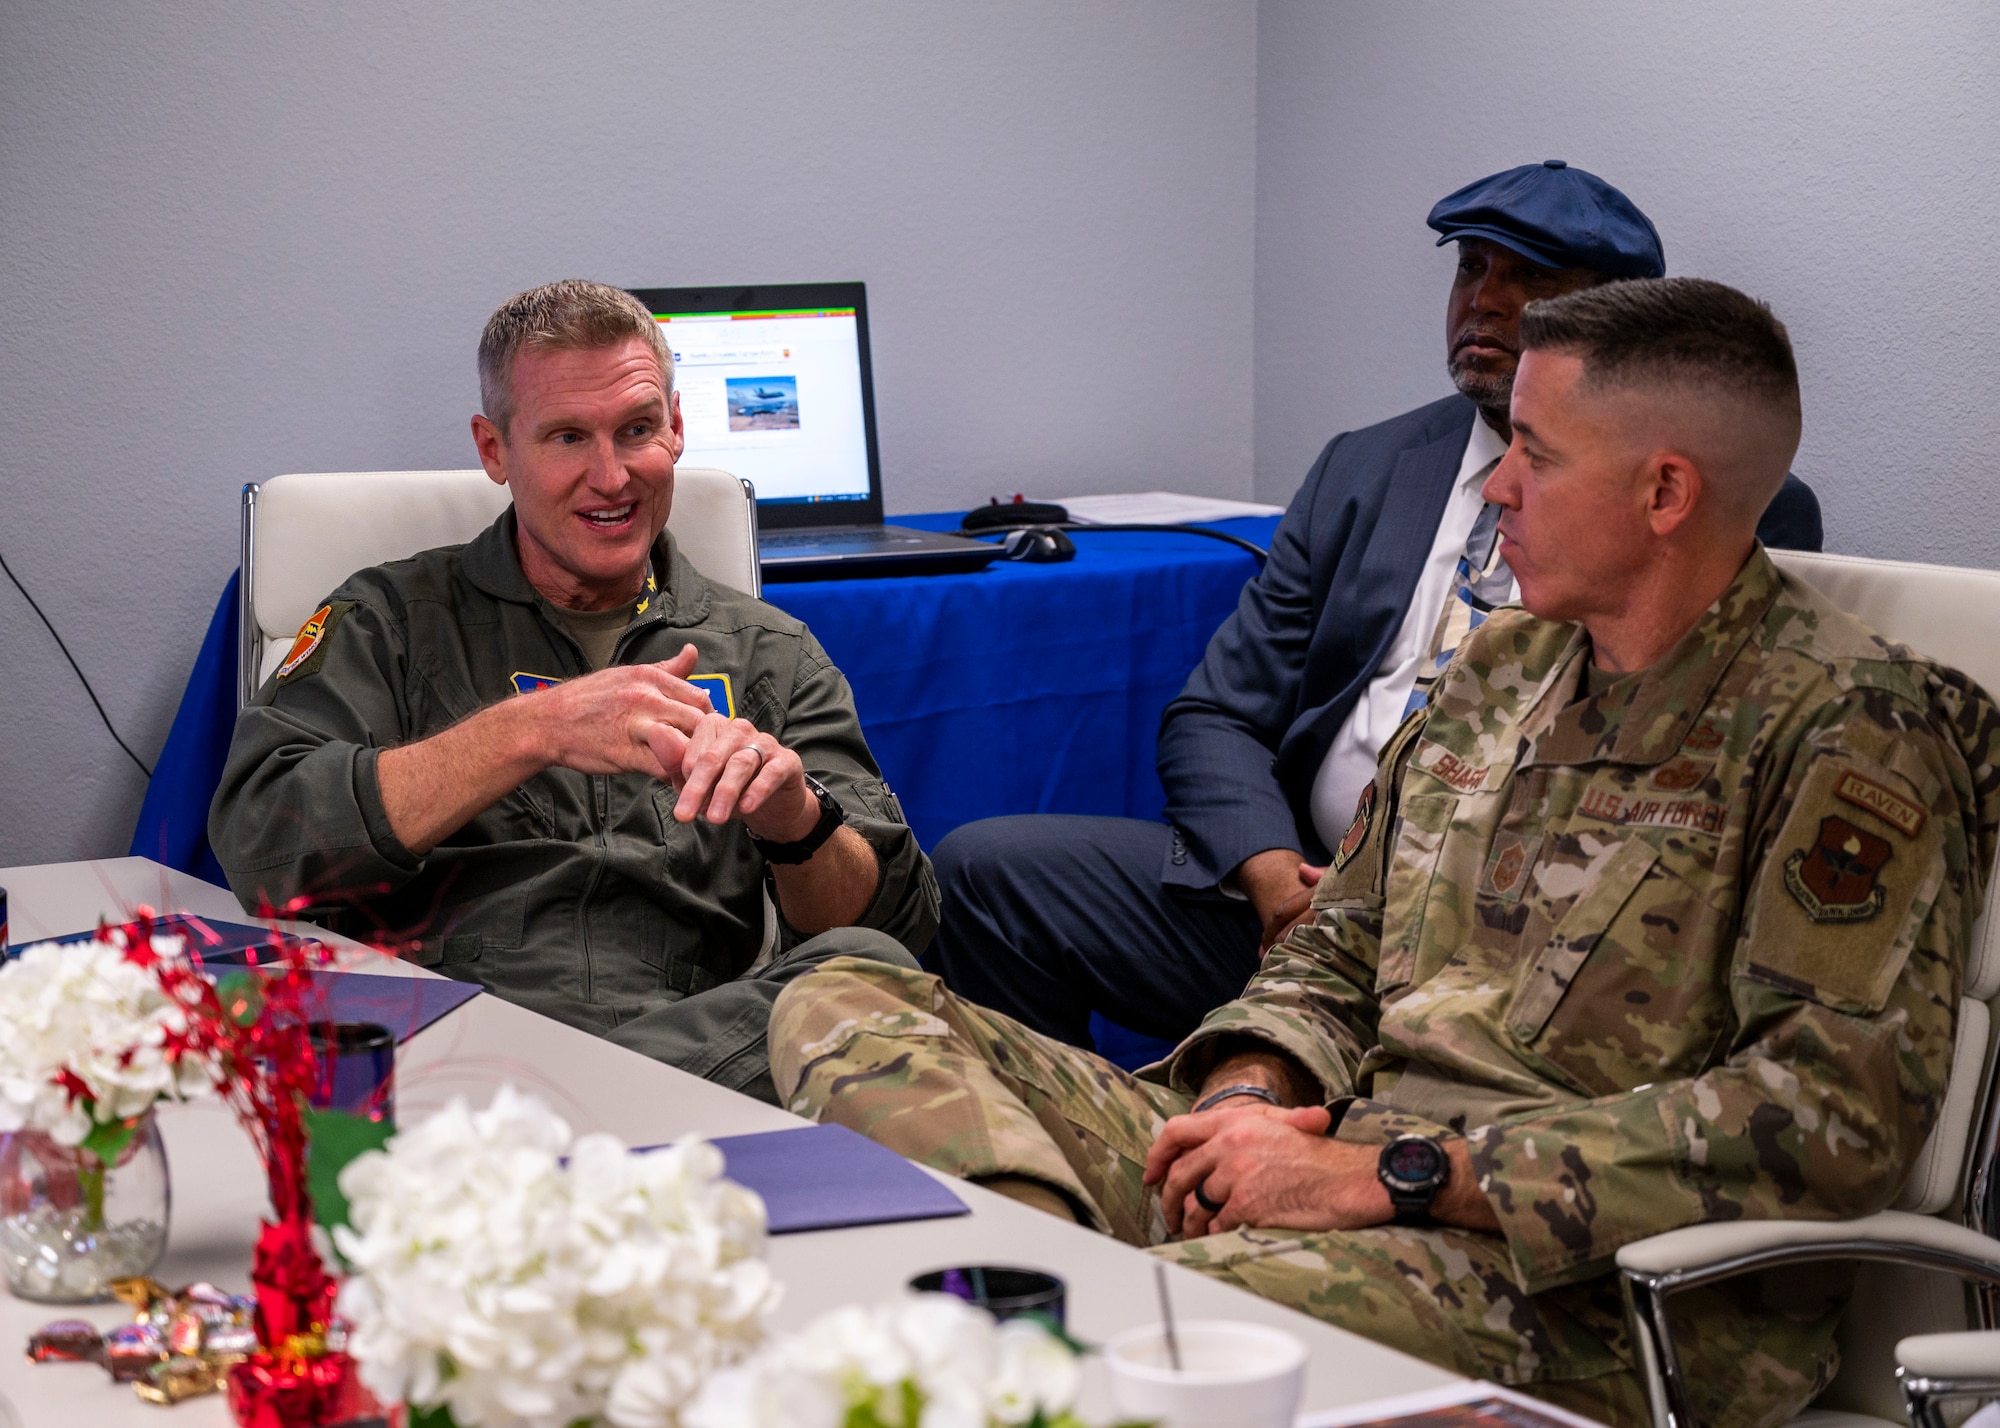 U.S. Air Force Brig. Gen. Jason Rueschhoff, 56th Fighter Wing commander, and Chief Master Sgt. Jason Shaffer, 56th FW command chief, speak to the military wives at the Heart Link Spouse Orientation Oct. 19, 2022, at Luke Air Force Base, Arizona.